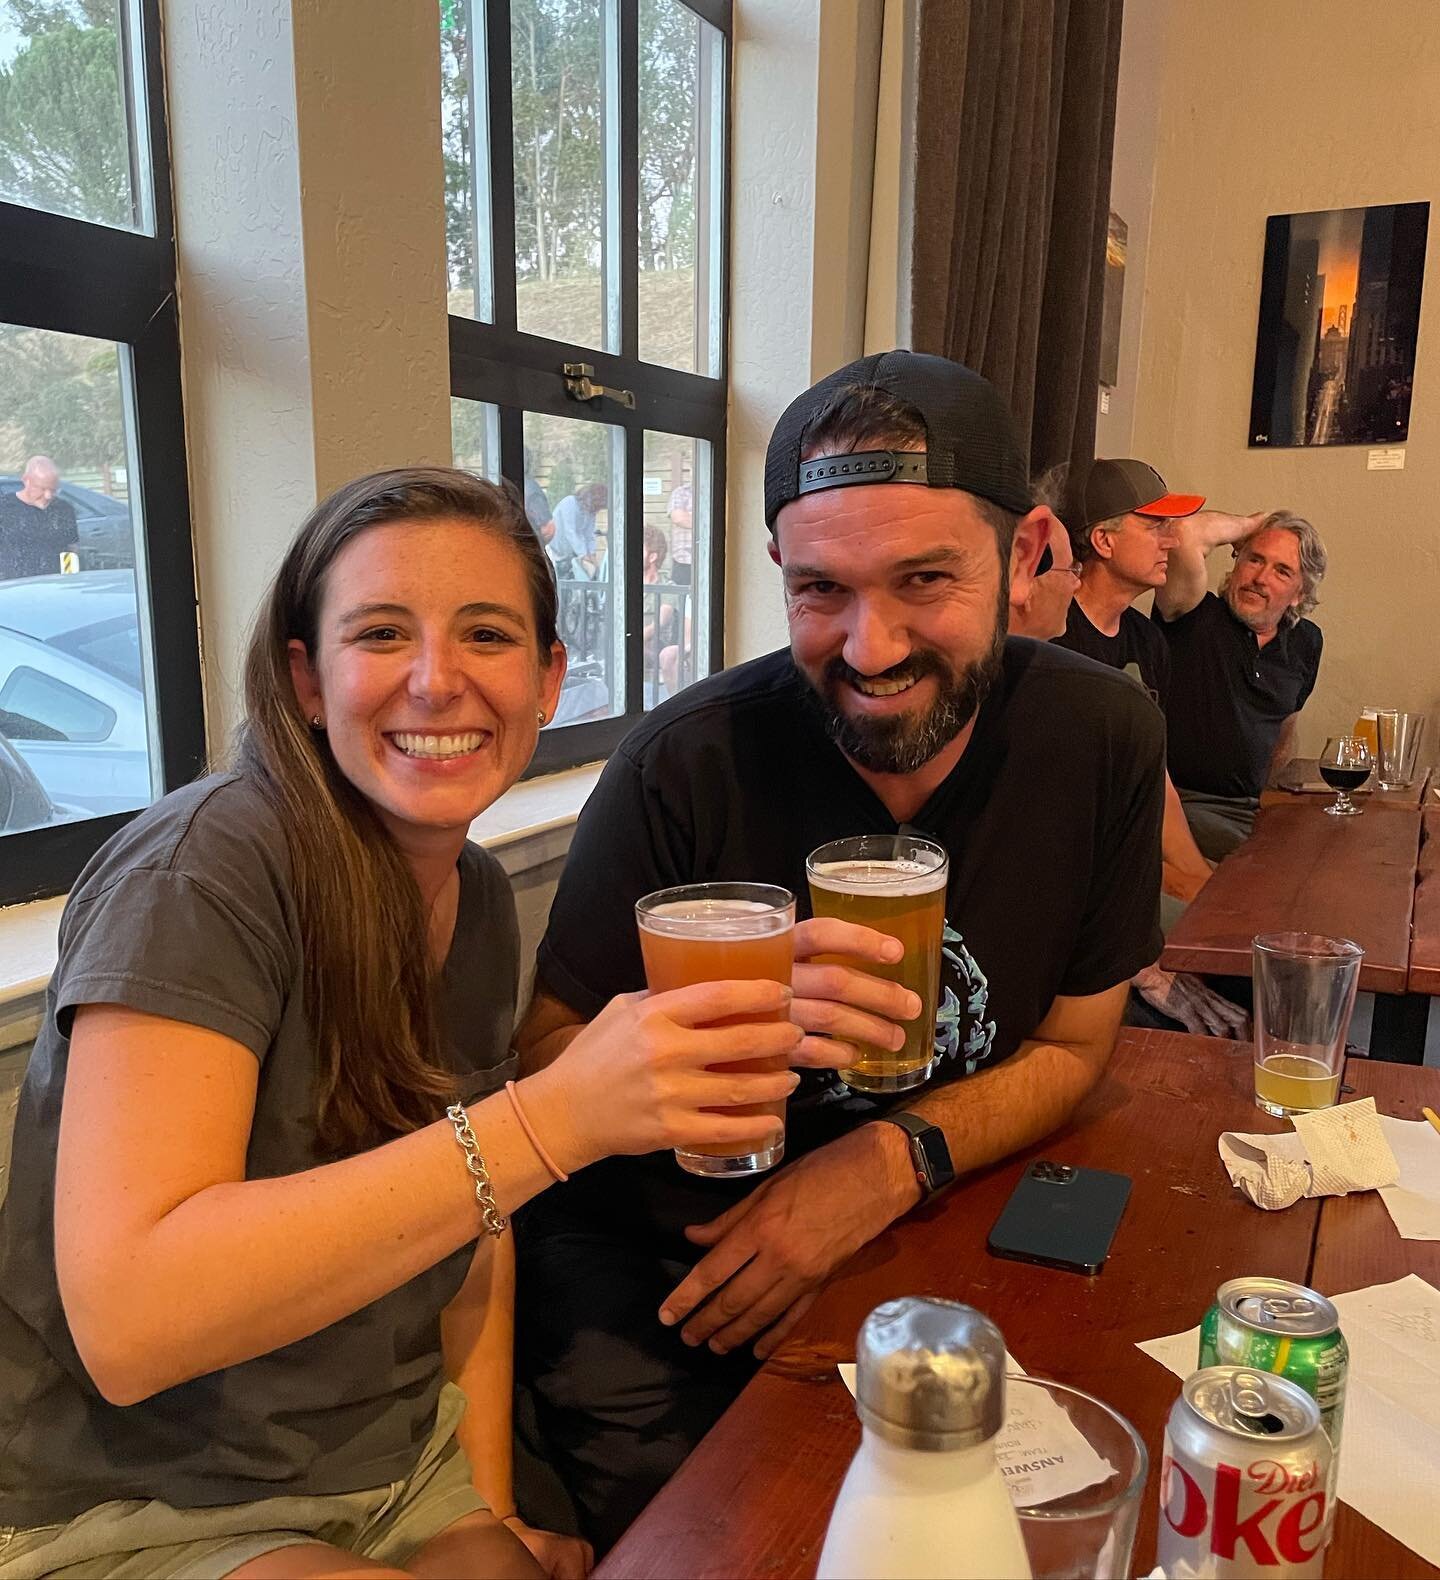 Congratulations to Take a Break for winning this week&rsquo;s trivia game! This group has attended trivia since the beginning! Thank you for your support!

#triva #beer #indianvalleybrewing #indianvalley #novato #marin #marincounty #brewery #craftbee